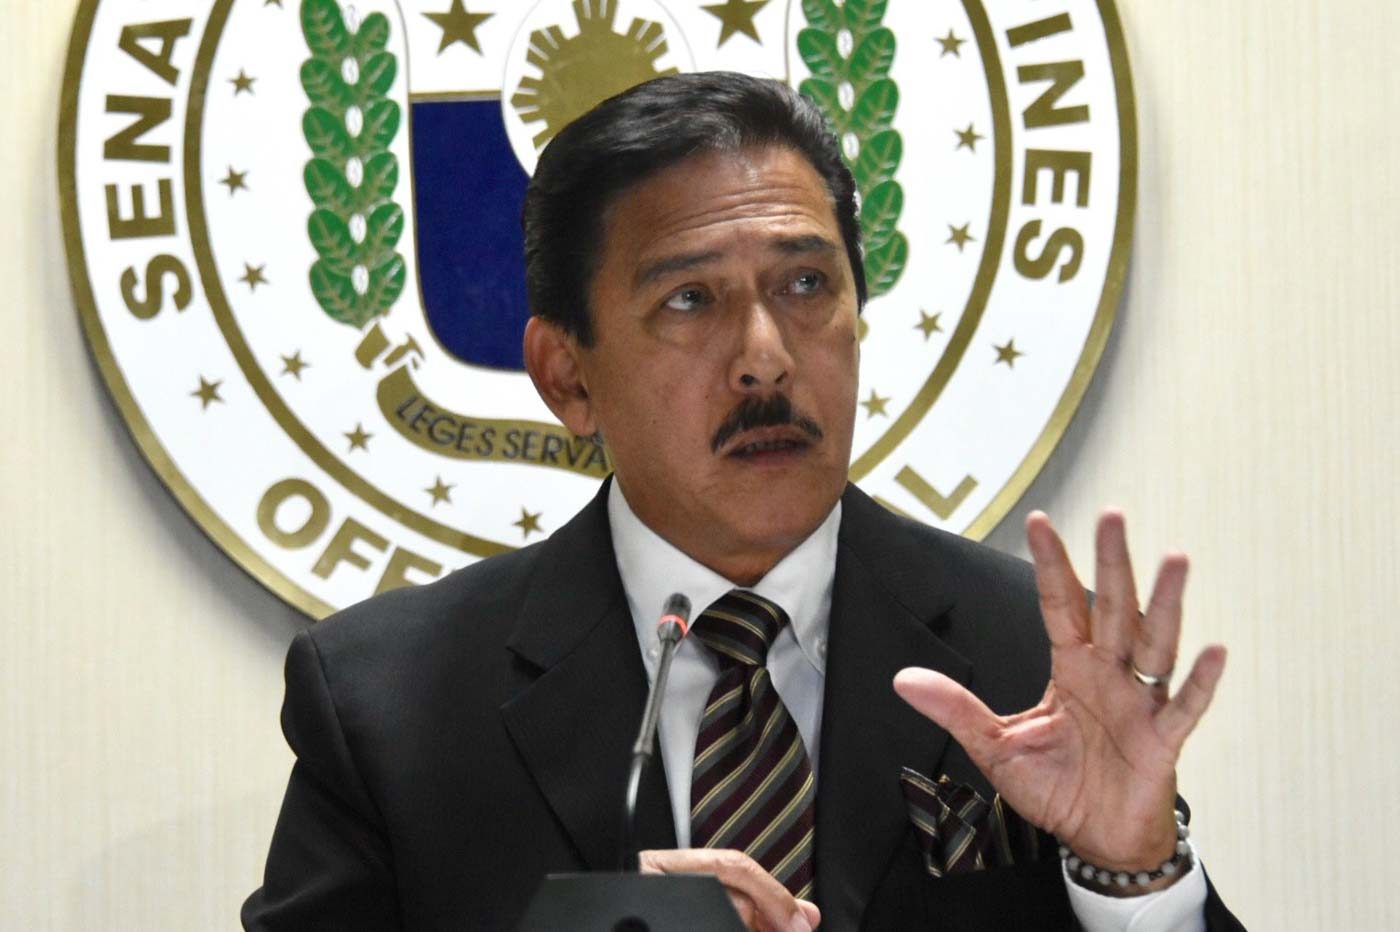 Tito Sotto seeks to lower minimum age of criminal liability to 13